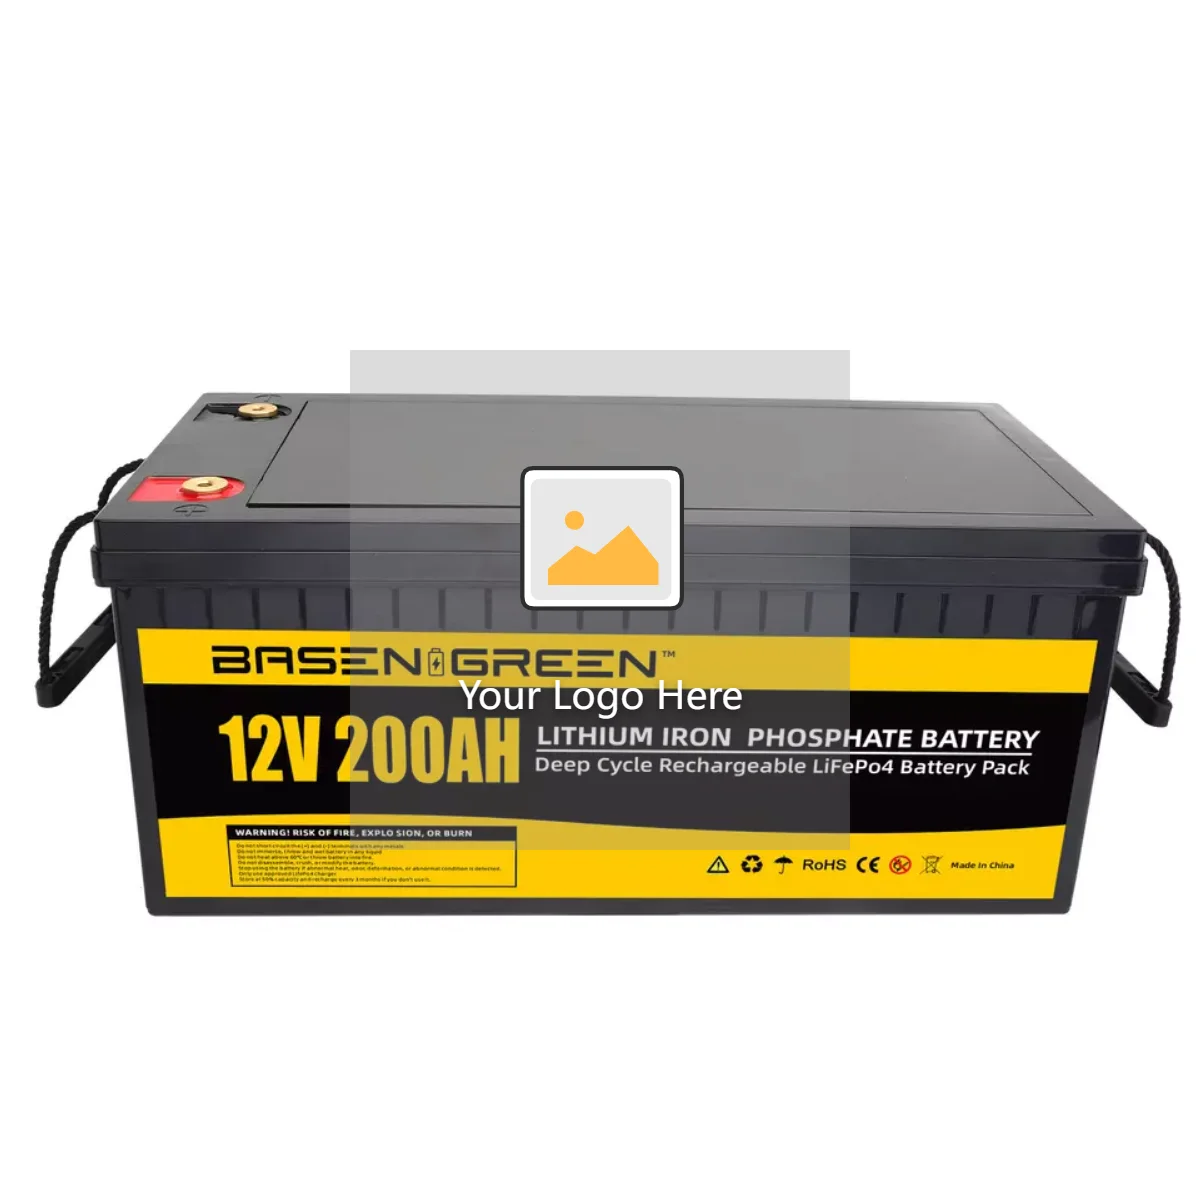 

Hot Sales Energy 12v 200Ah rechargeable lithium storage battery for Solar Systems